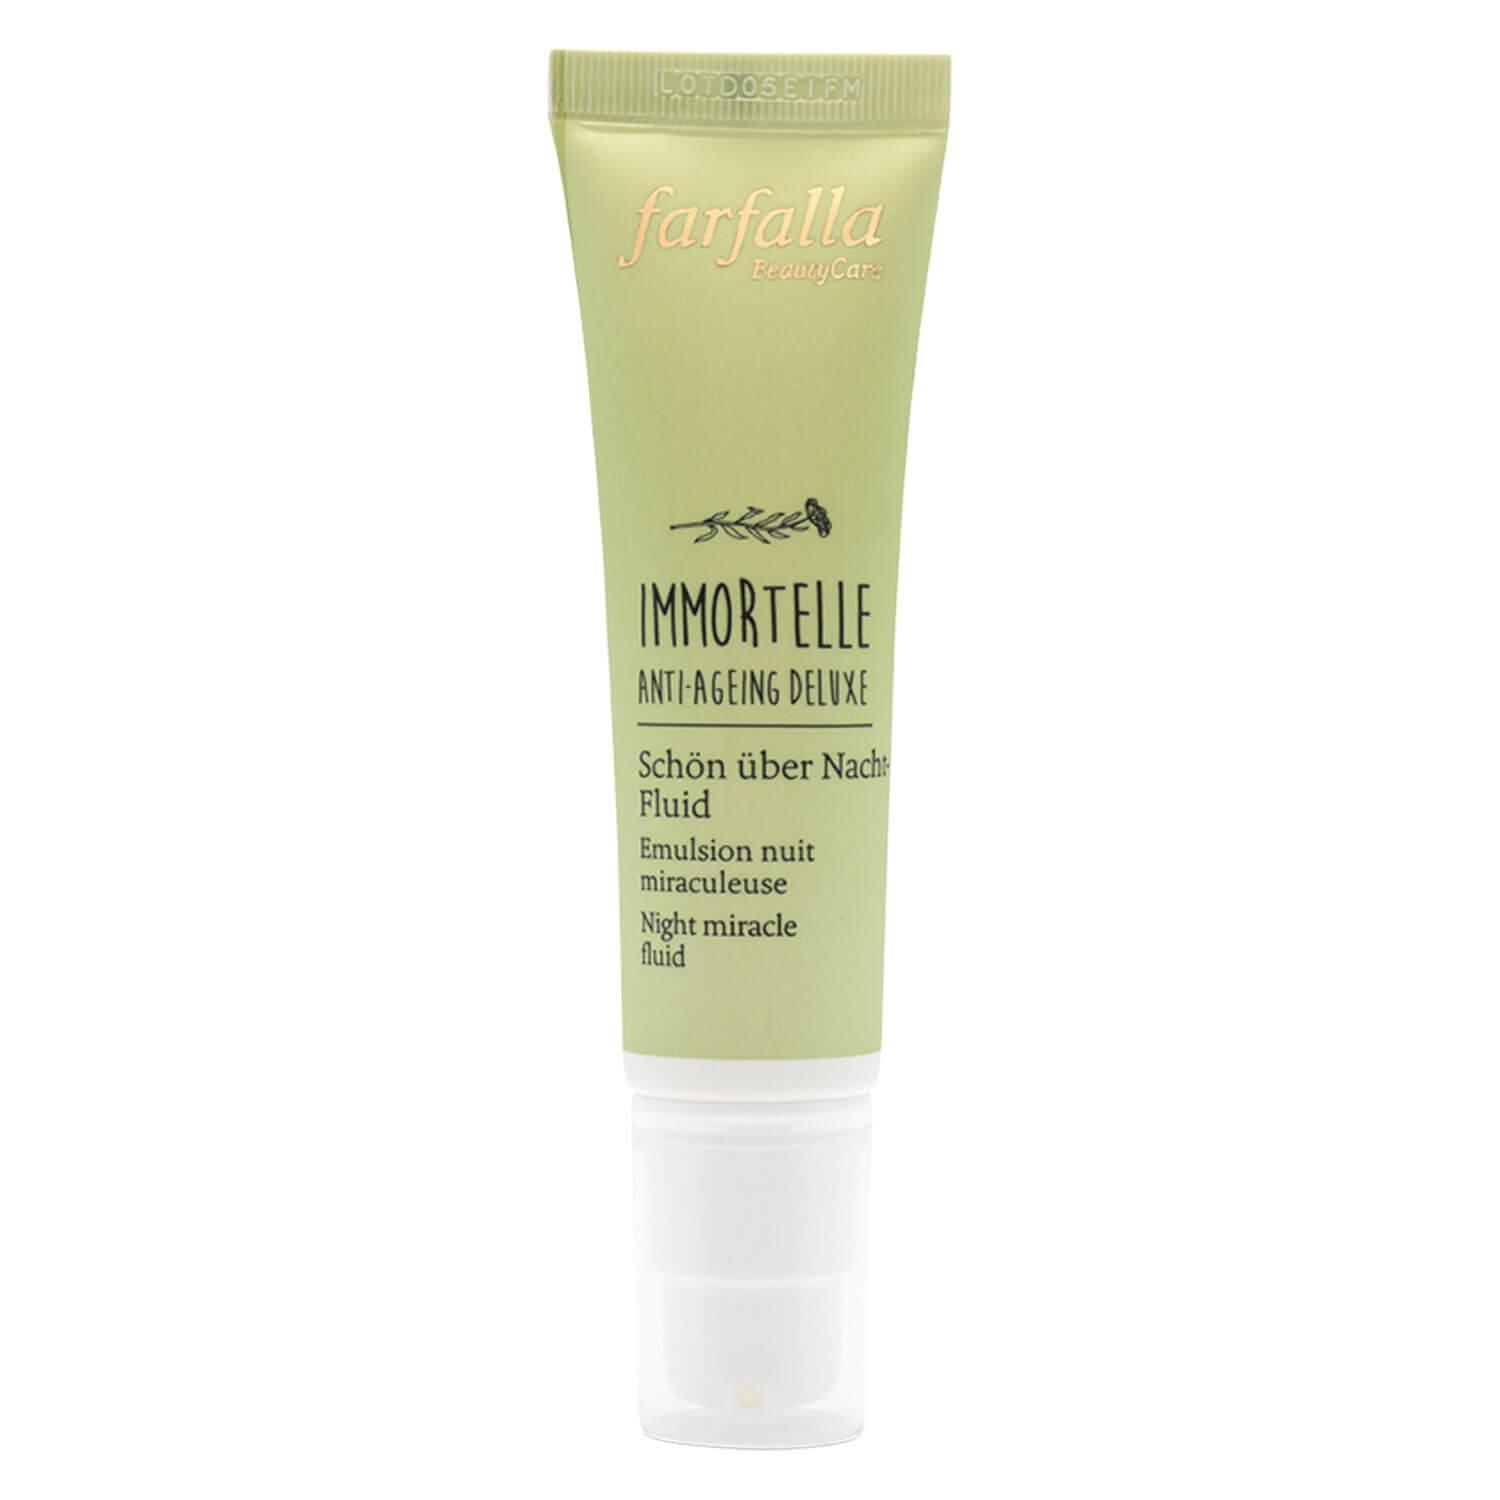 Immortelle Anti-Ageing Deluxe - Emulsion nuit miraculeuse